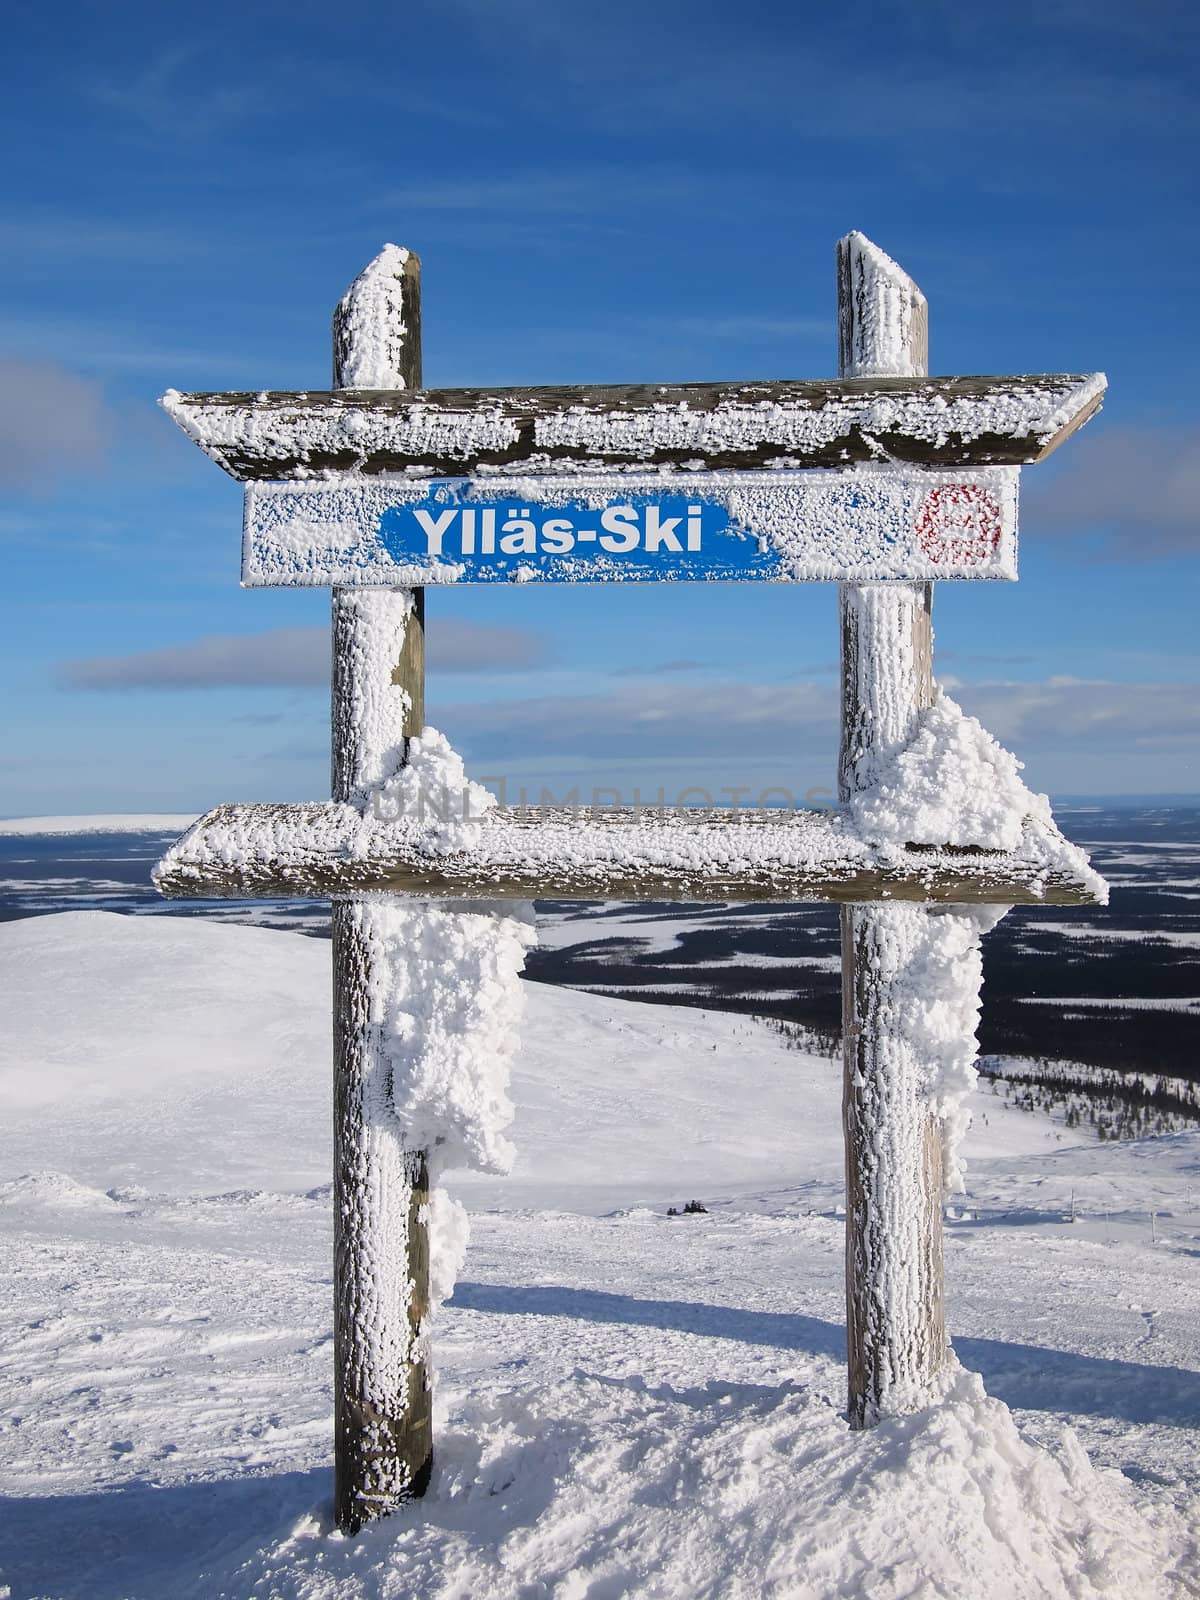 Piste sign of the skiing hill of Yll�s with a Lapland background.